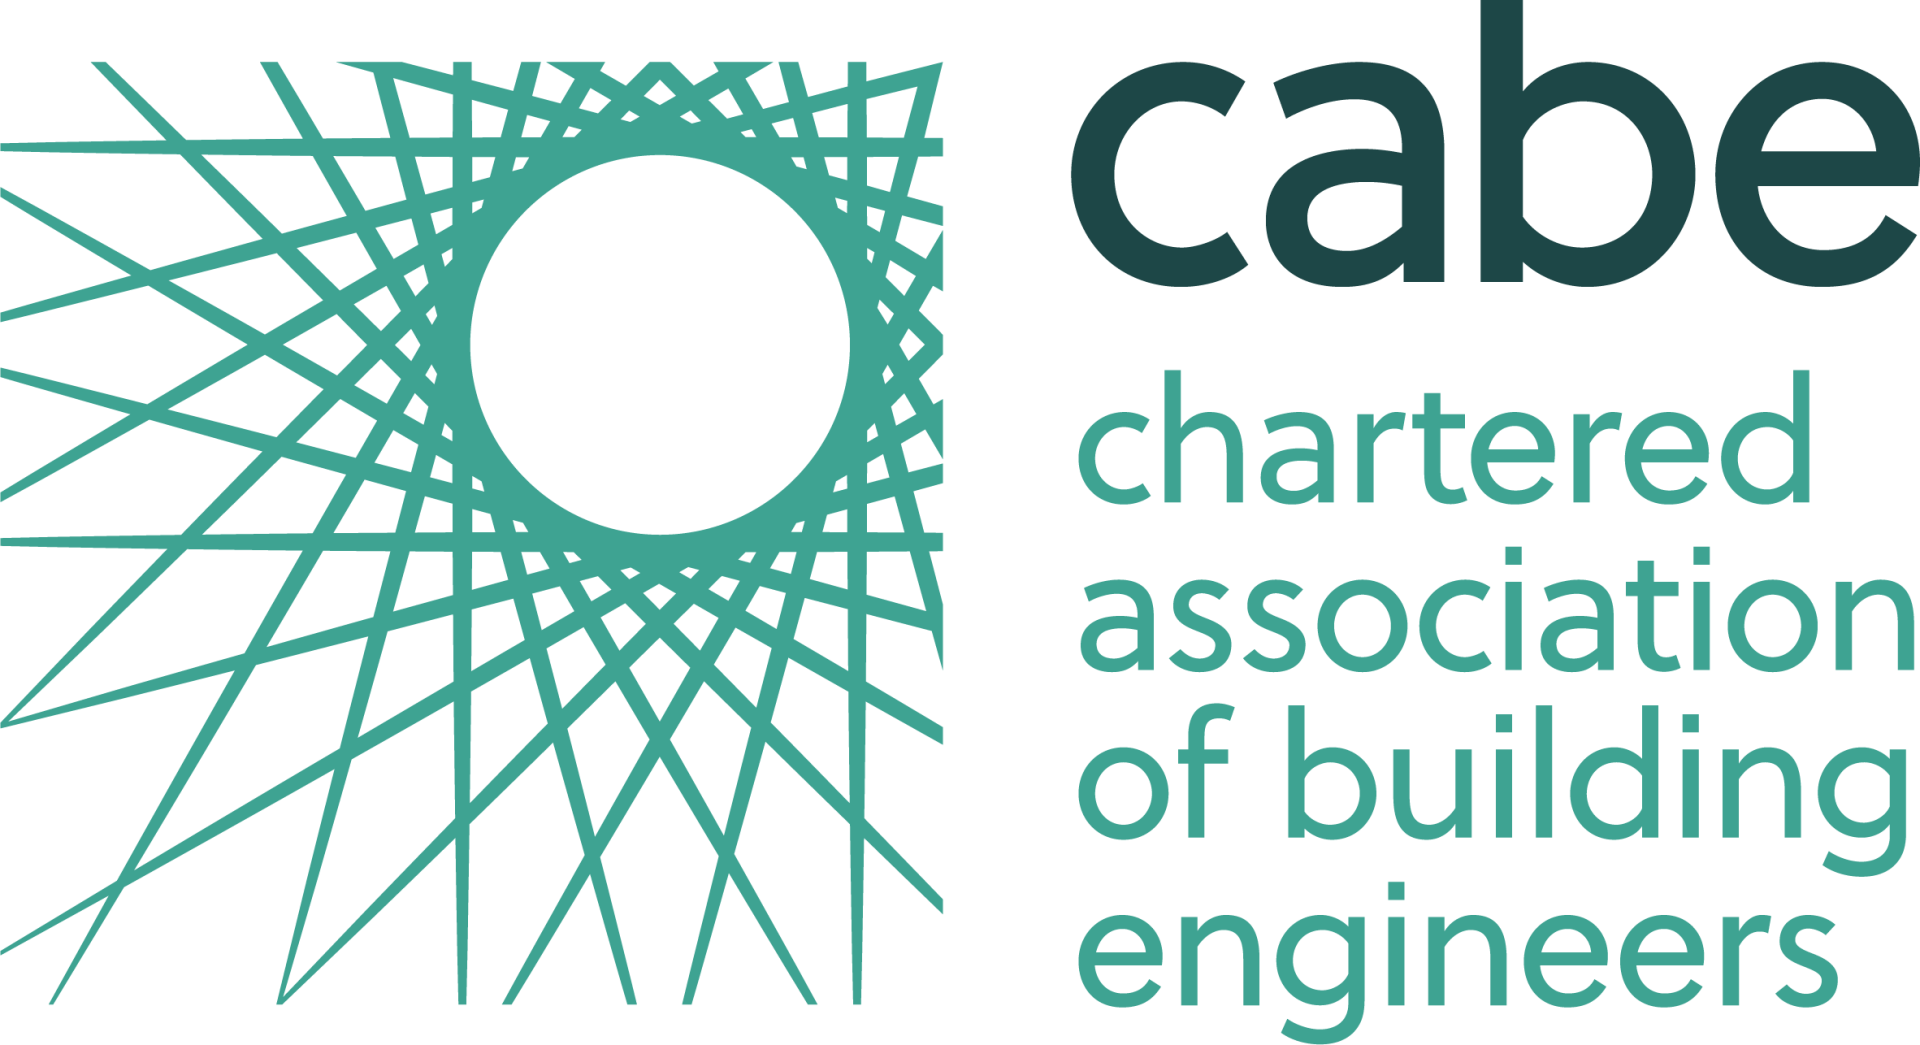 Member of Chartered Association of Building Engineers)